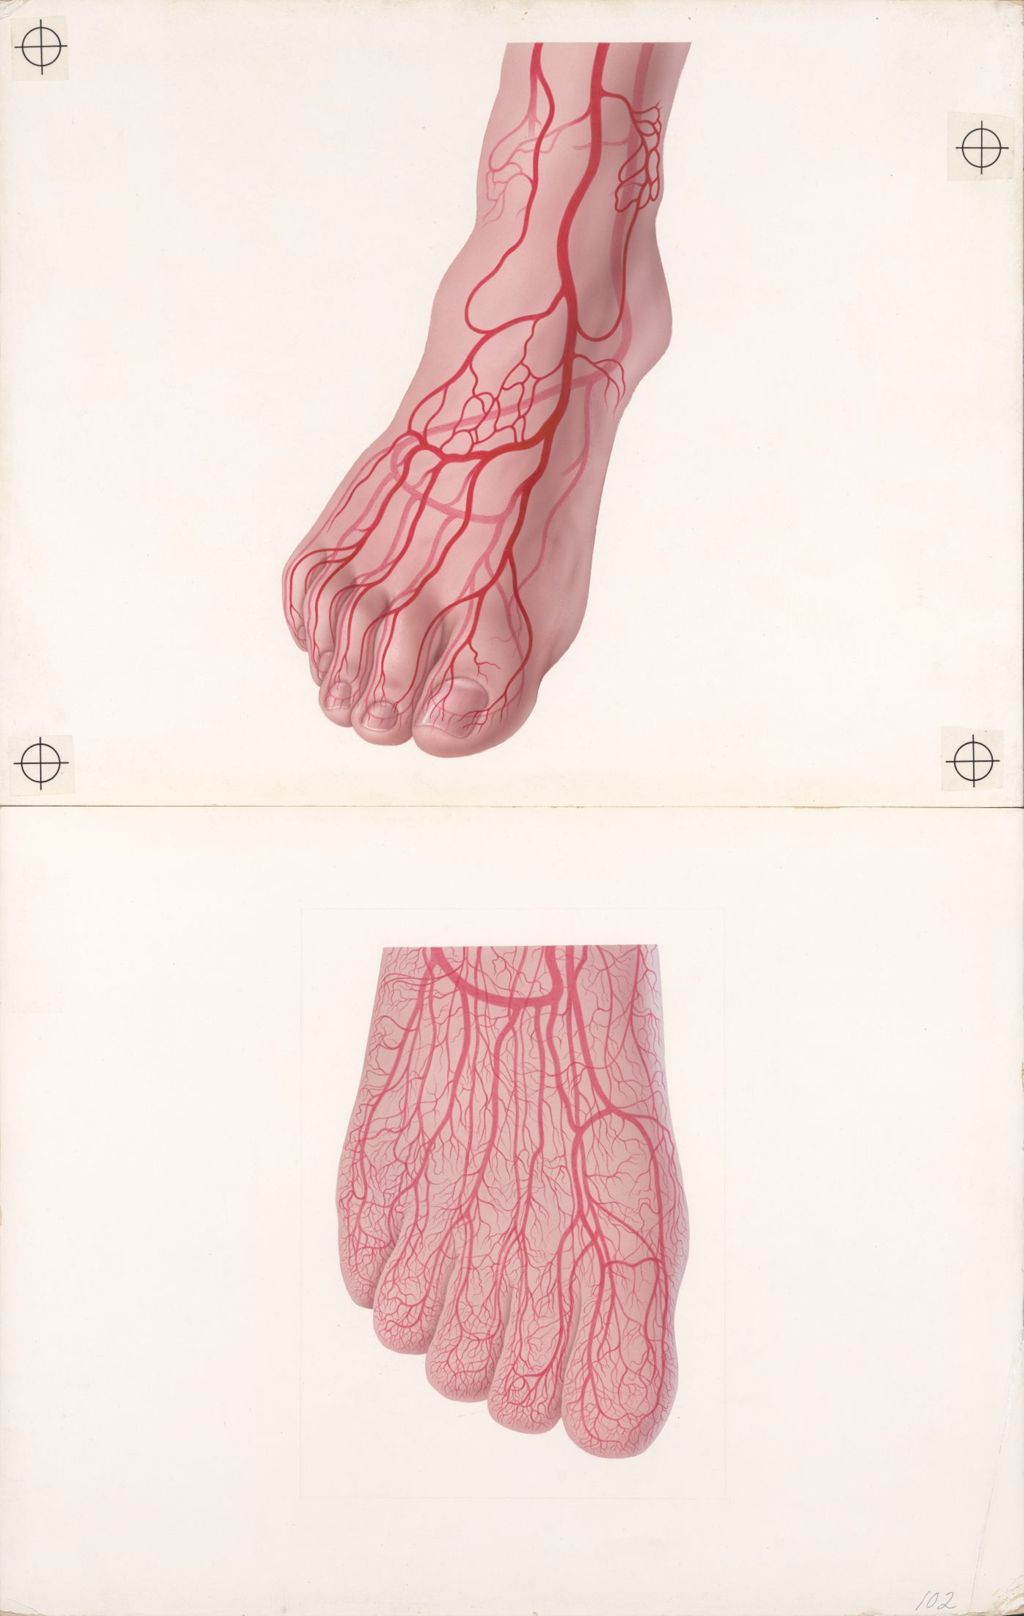 Miniature of Medical Profiles, Aldoril, Increased Resistance to Blood Flow, Plate I